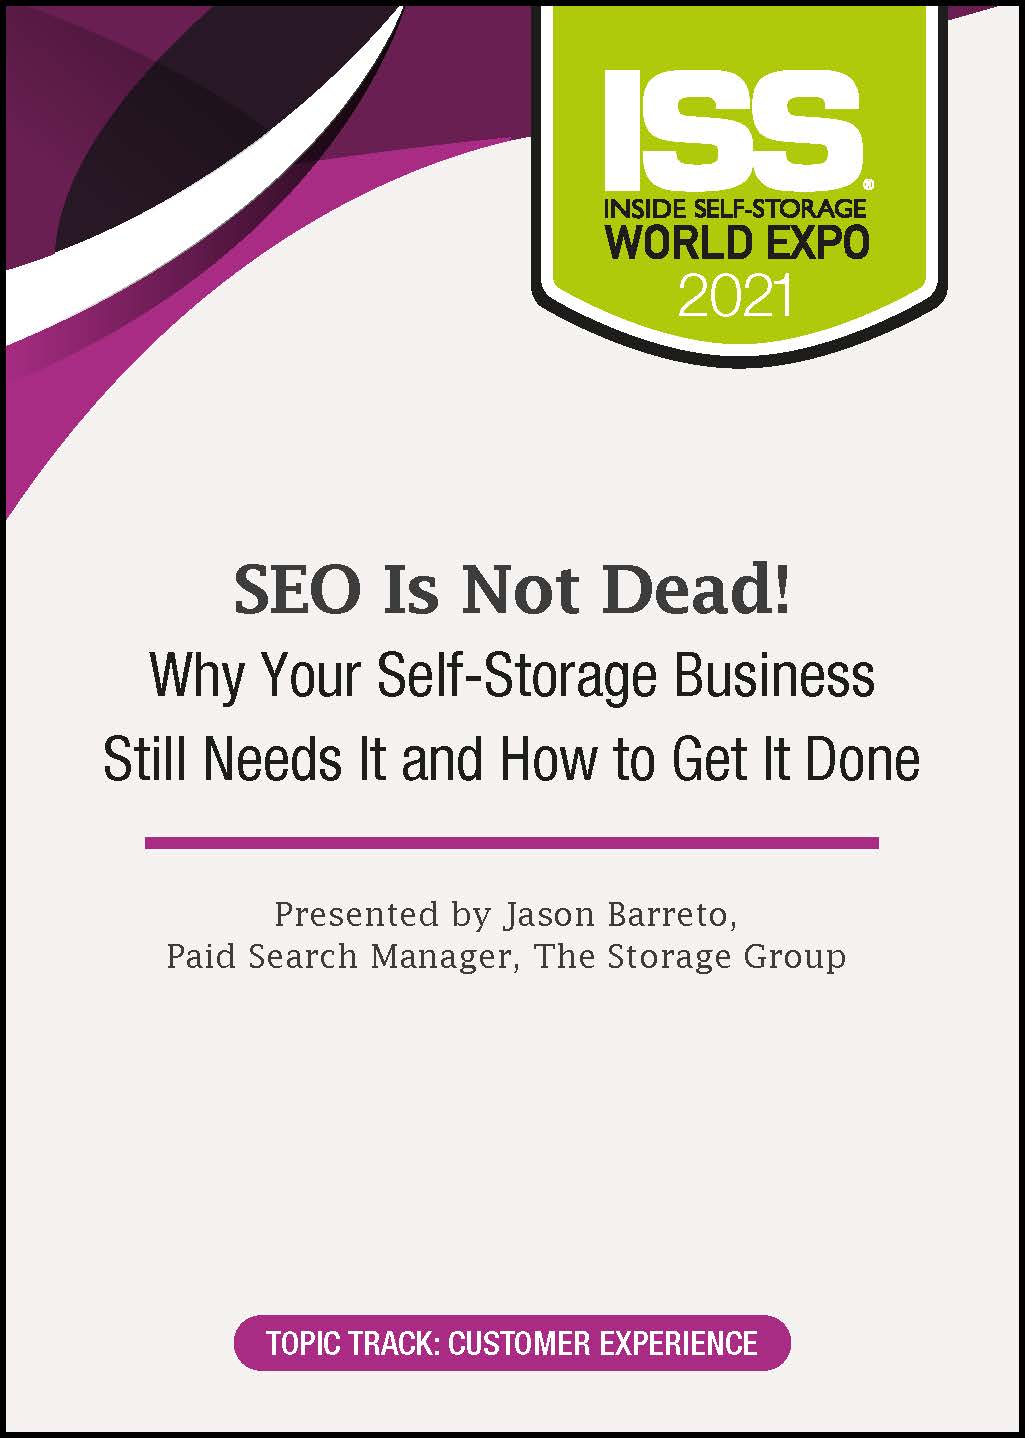 SEO Is Not Dead! Why Your Self-Storage Business Still Needs It and How to Get It Done